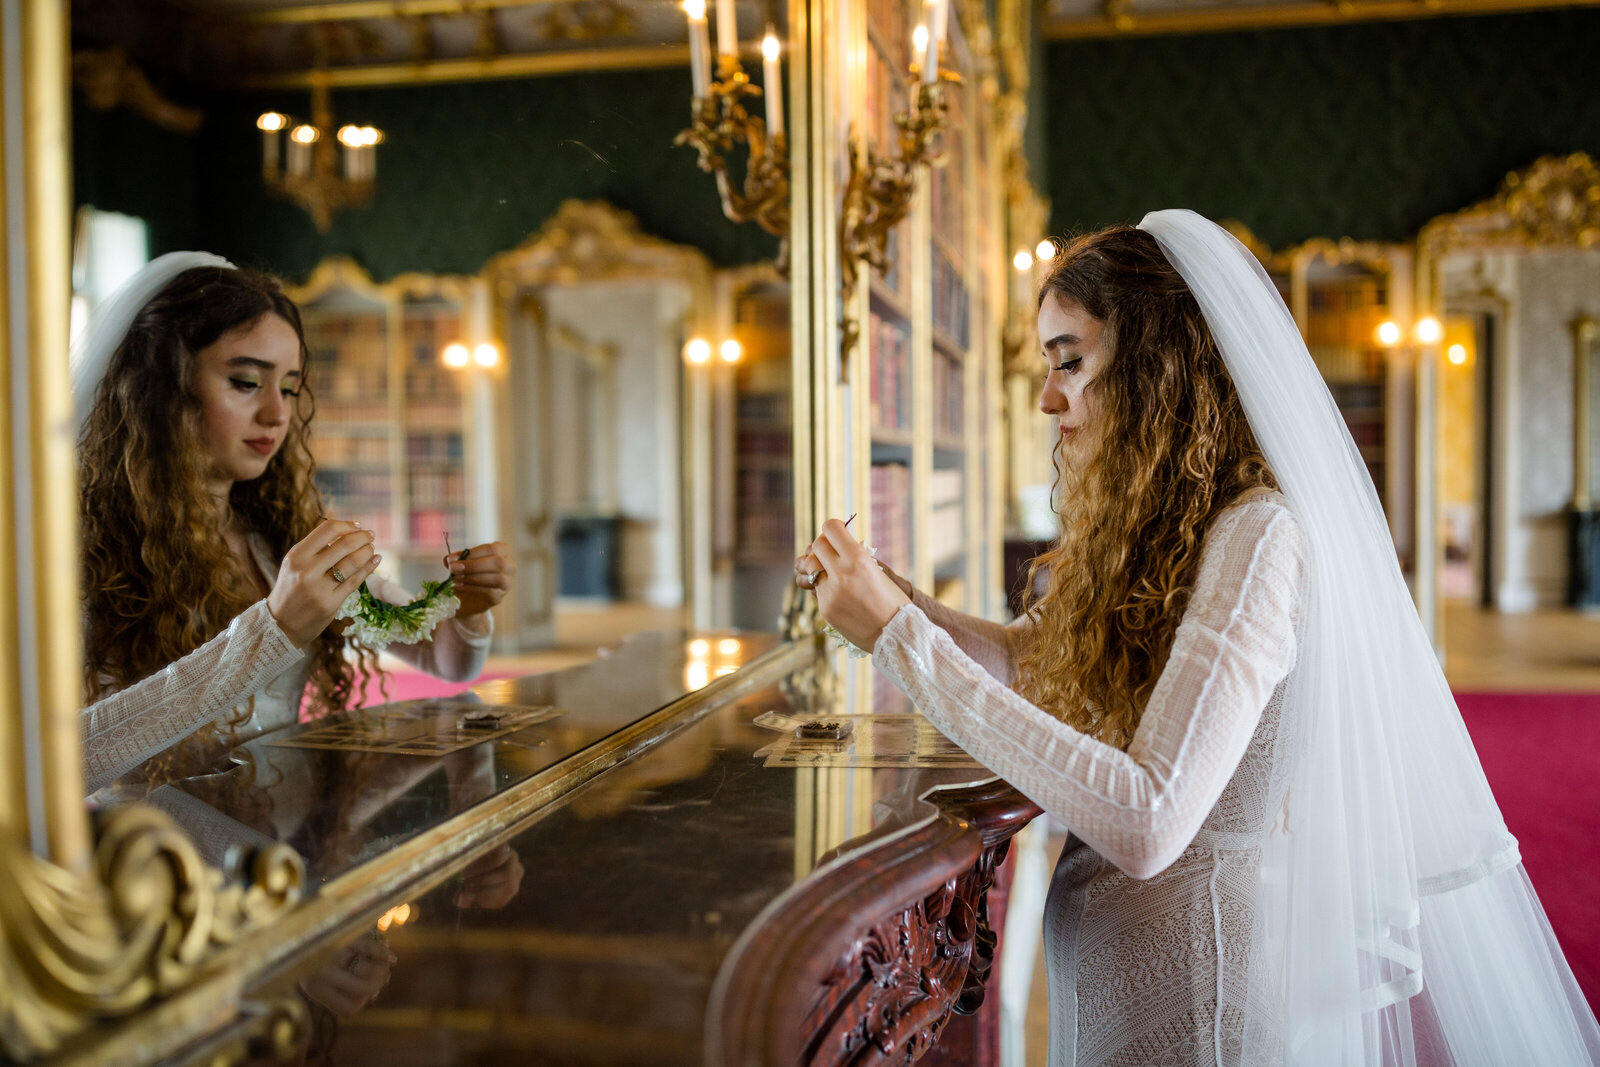 A photo of a Bride stood in front of a mirror